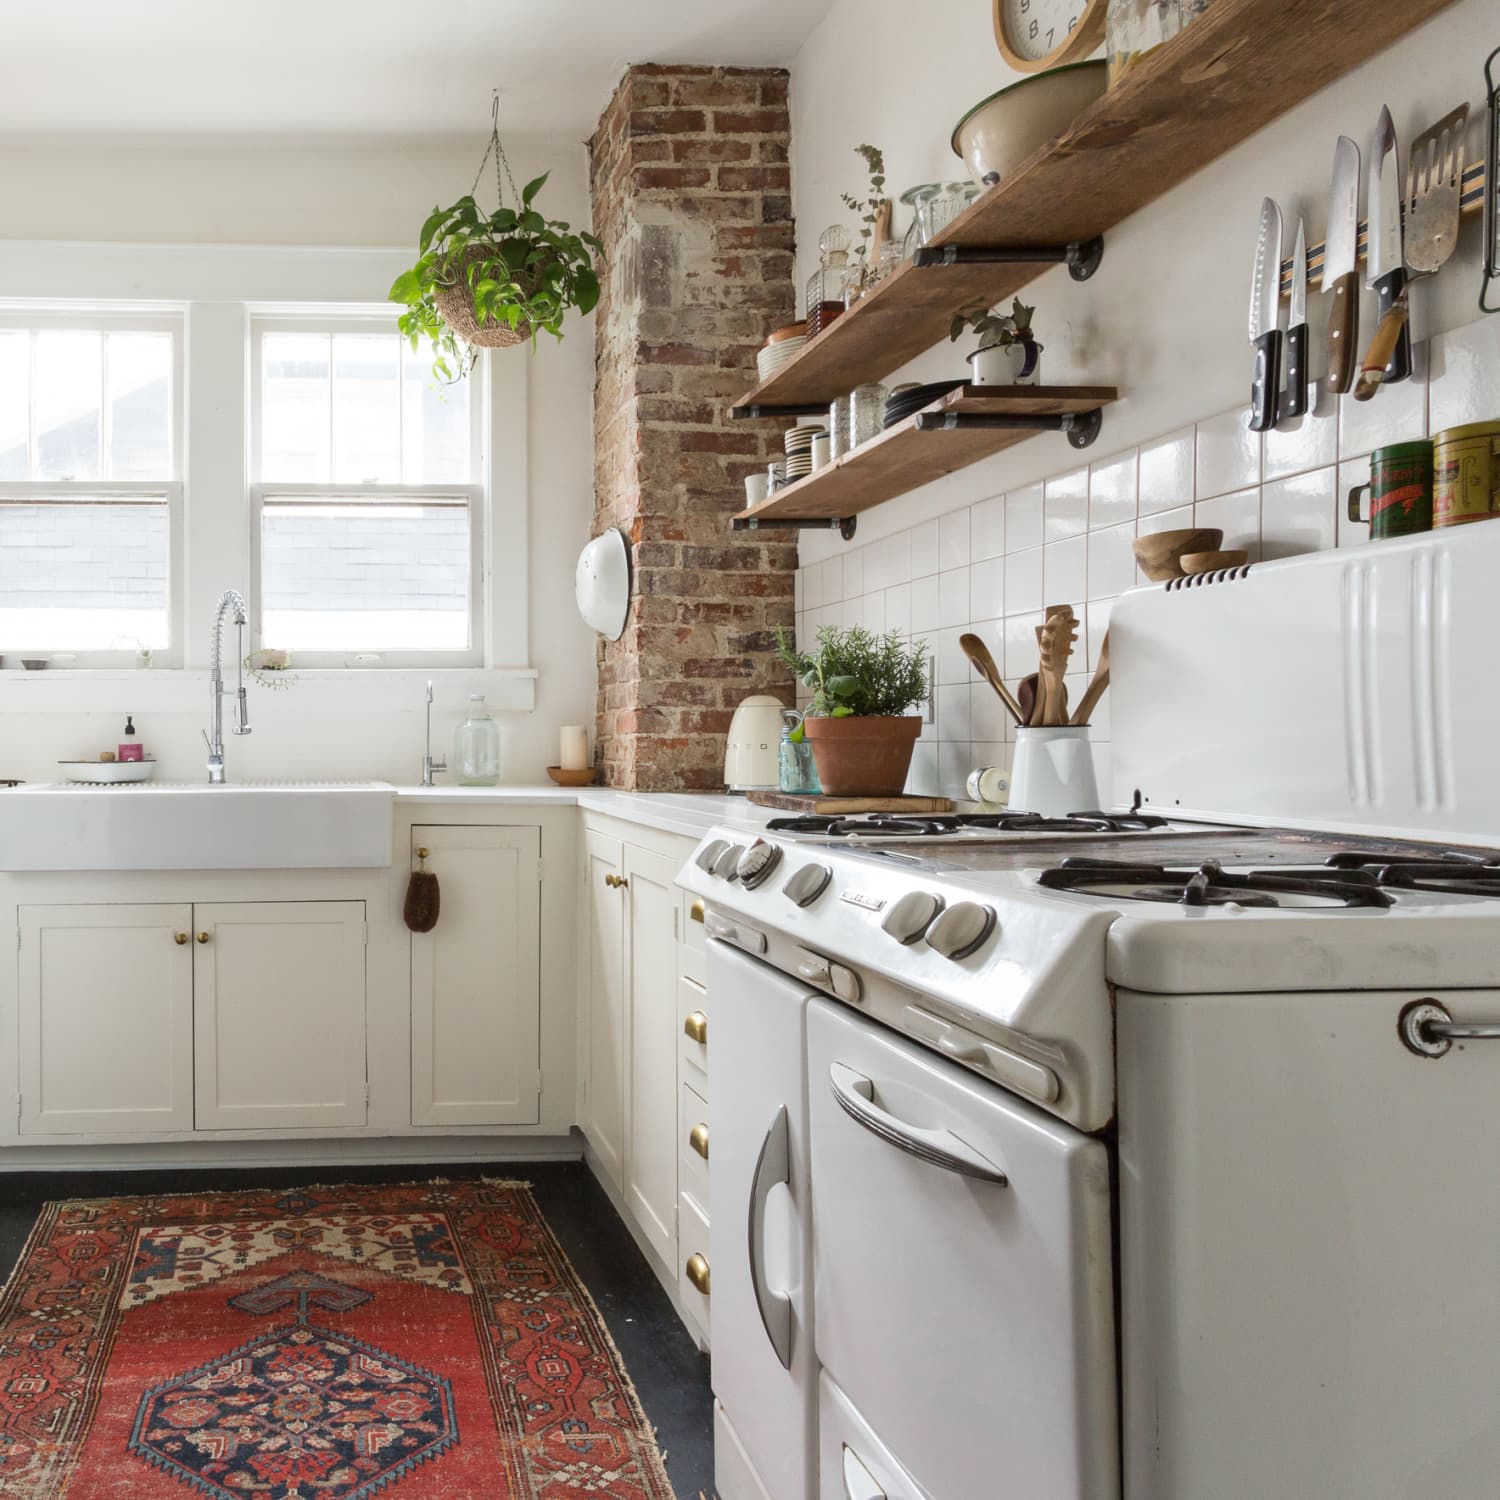 Why You Need an Easy and Inexpensive Vinyl Kitchen Rug